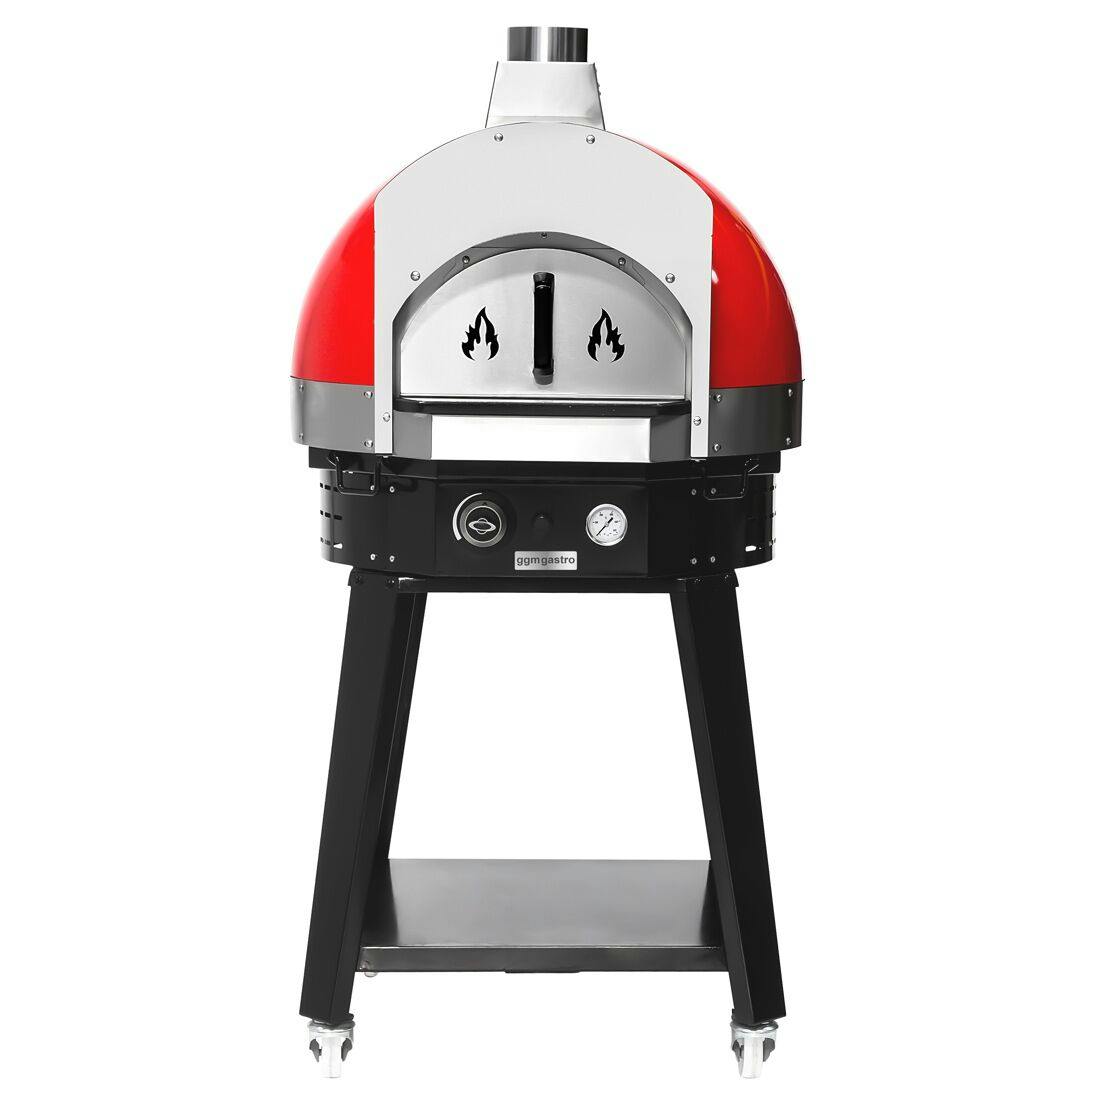 Gas pizza oven red - incl. base - height: 0.83 m	